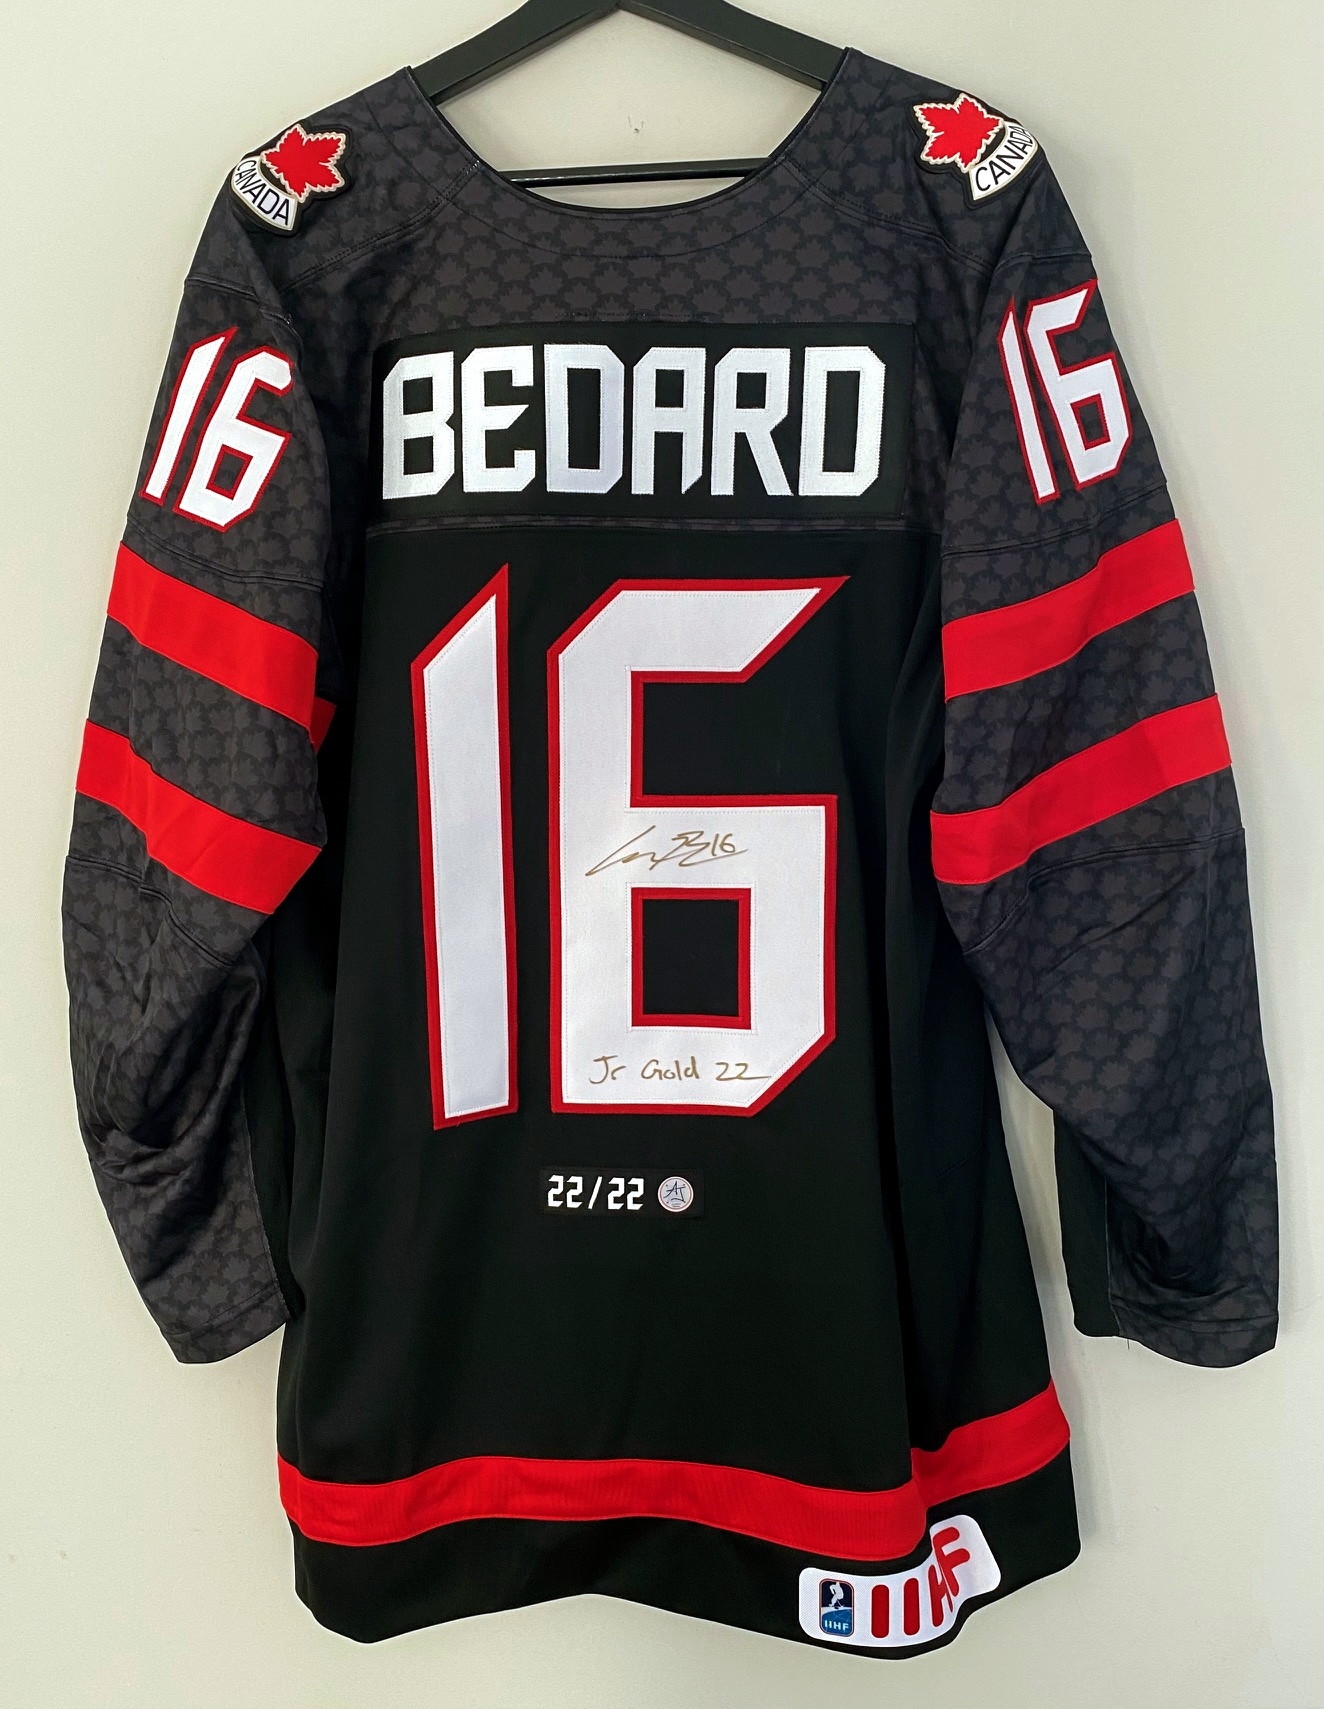 Connor Bedard Signed Team Canada Black Nike Jersey with Jr Gold 22 Note #22/22